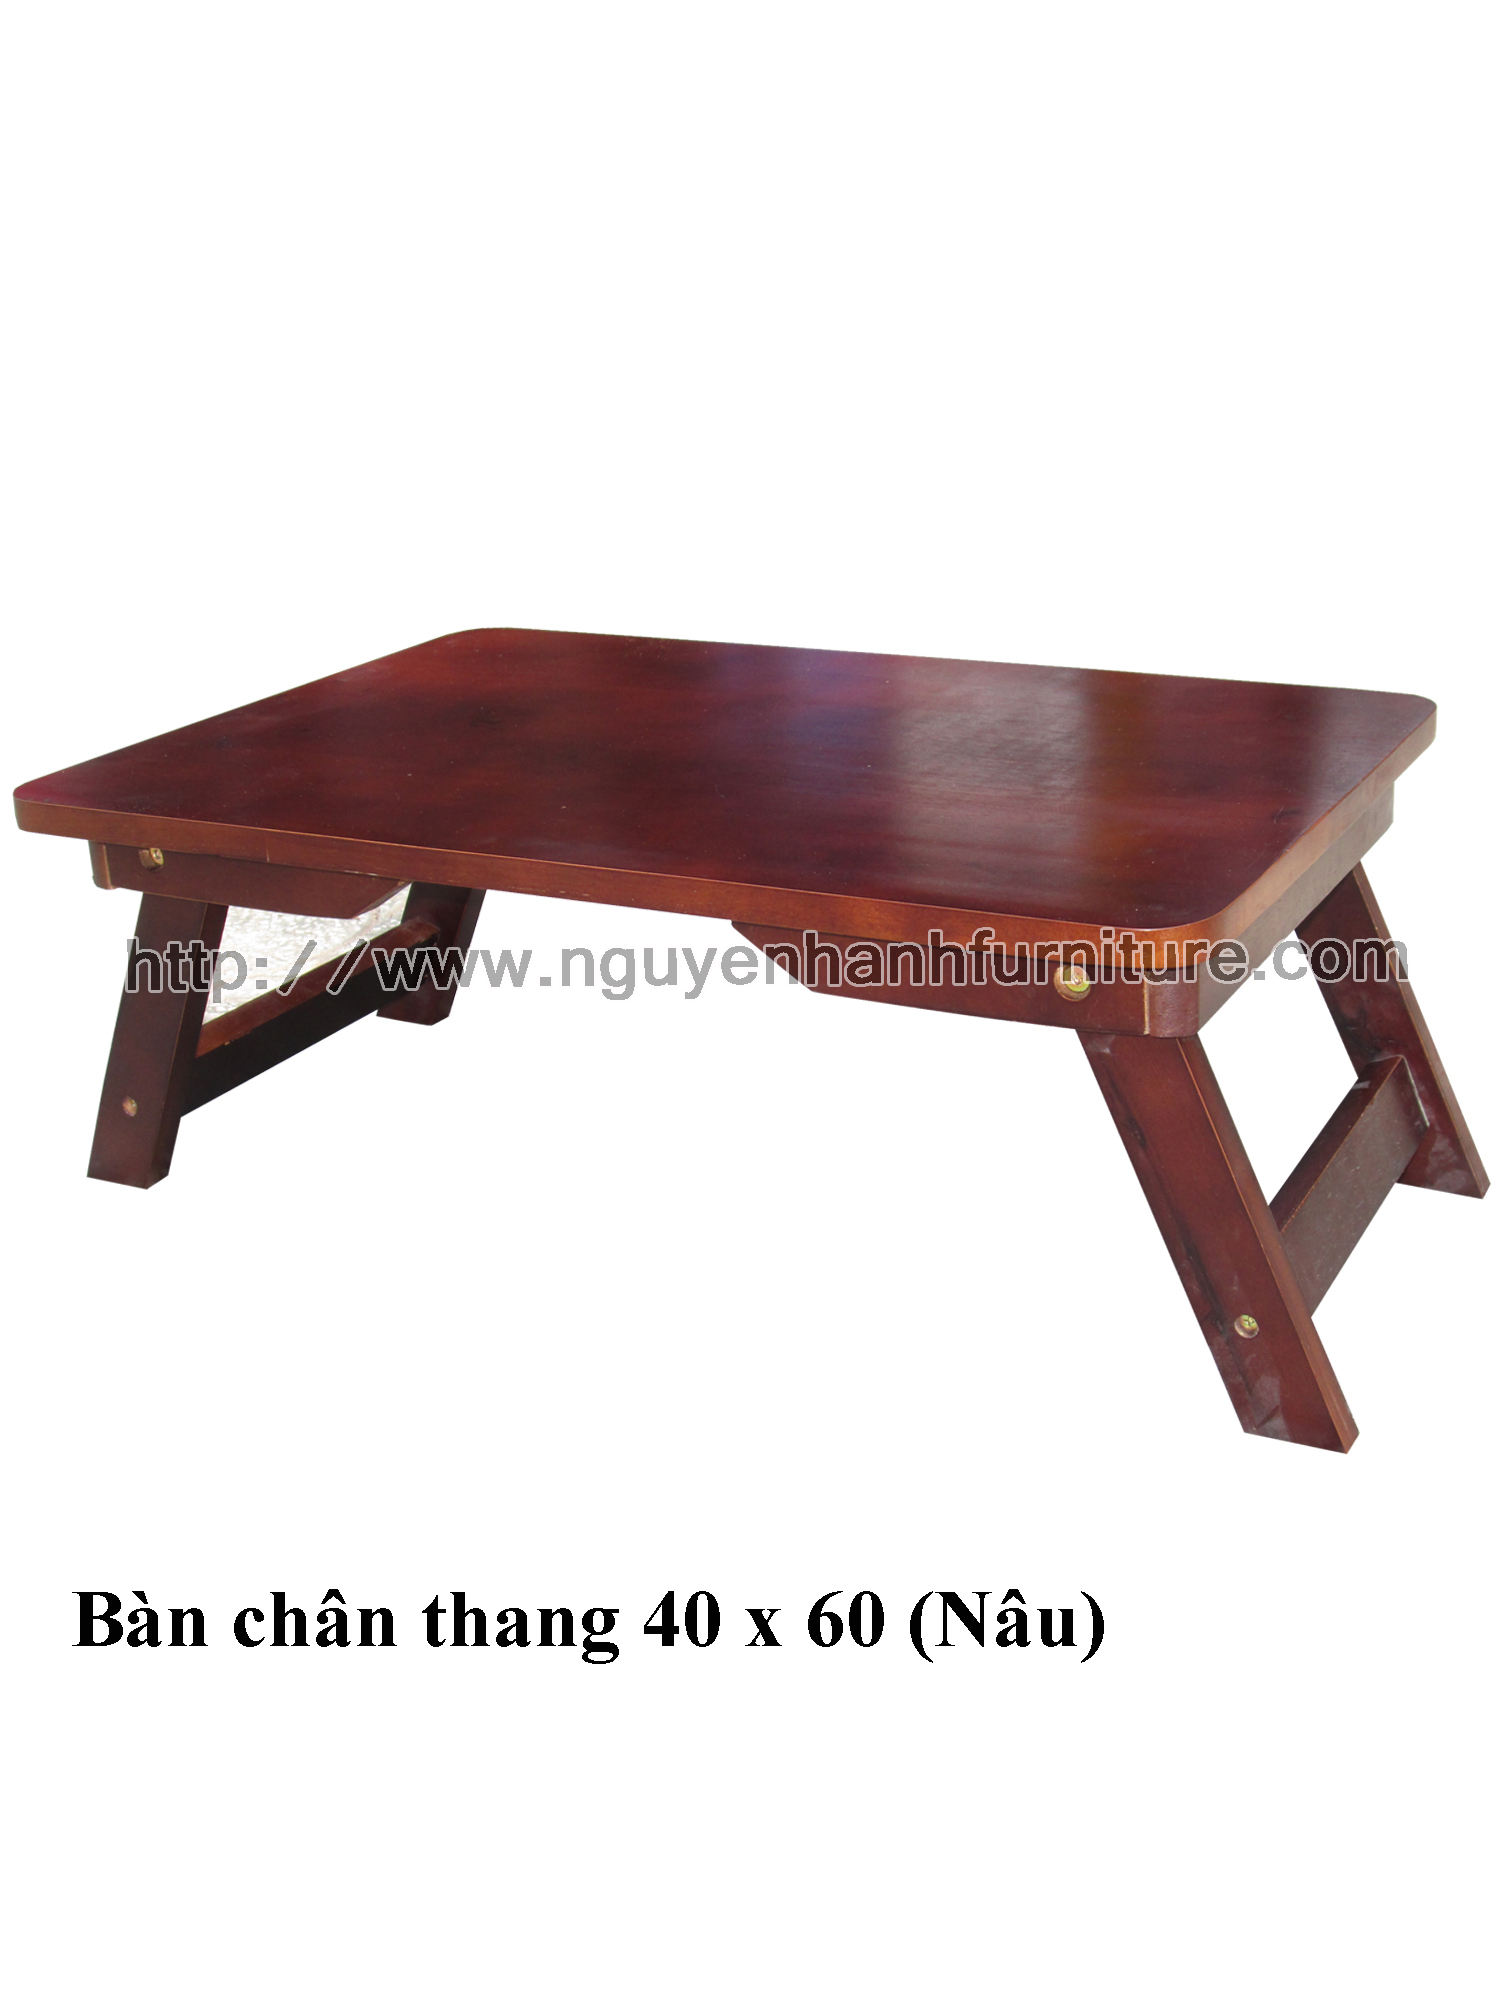 Name product: 4 x 6 Tea table with ladder shape legs (Brown) - Dimensions: 40 x 60 x 24 (H) - Description: Wood natural rubber